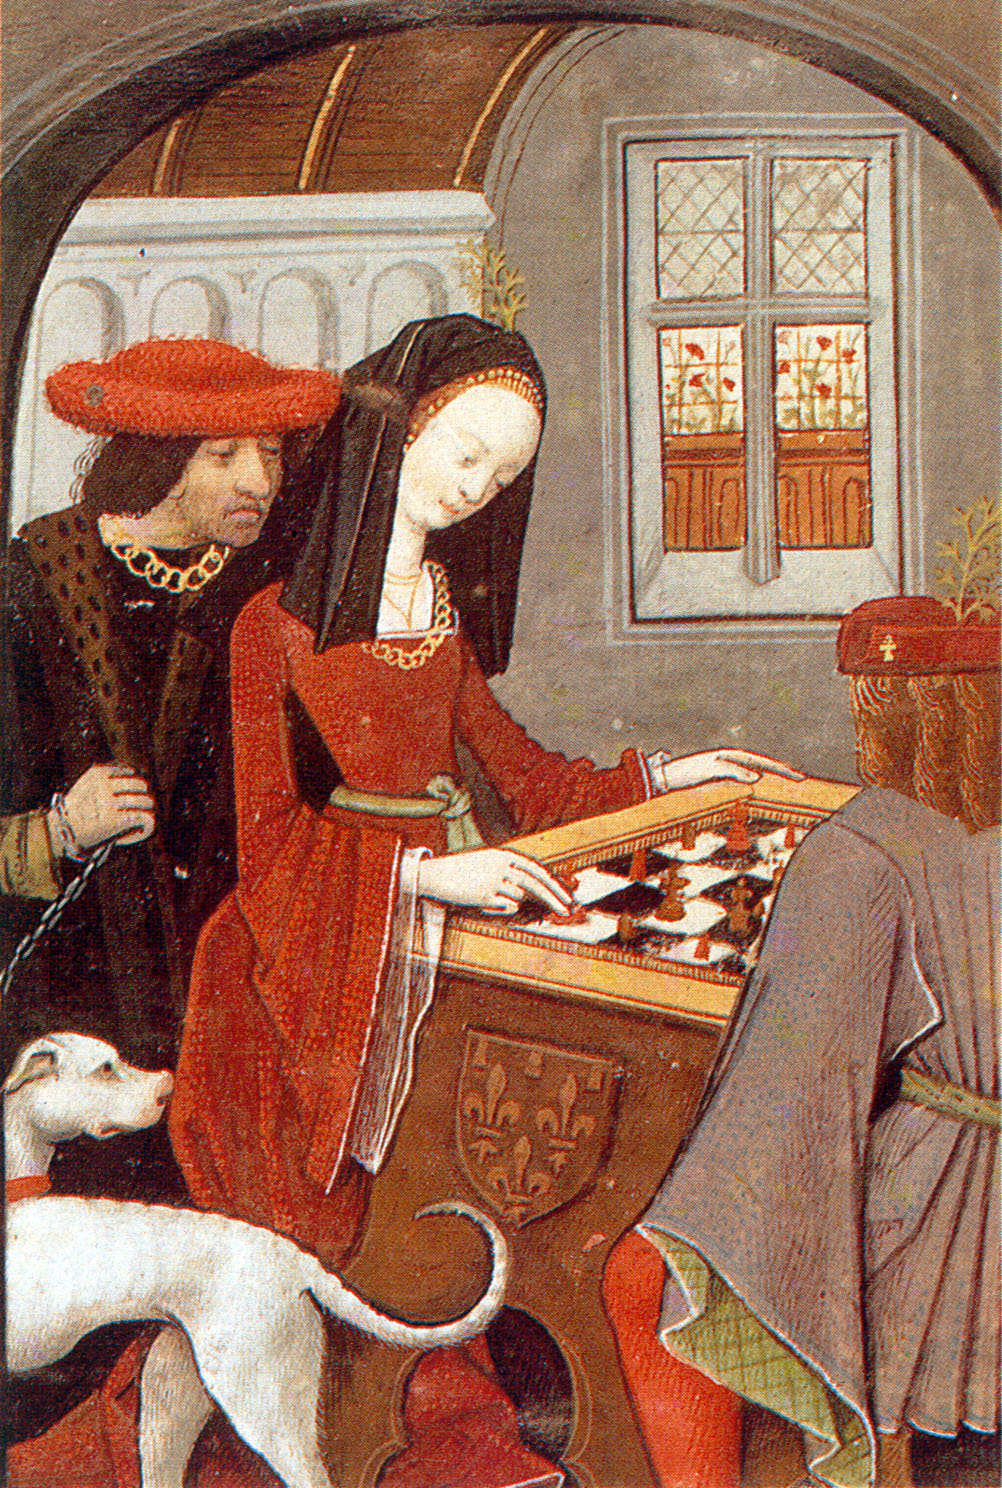 1500 (approx) - from Book of Chess Lovers by Louise de Savoy - Francis I and Margueritte de Navarre playing chess